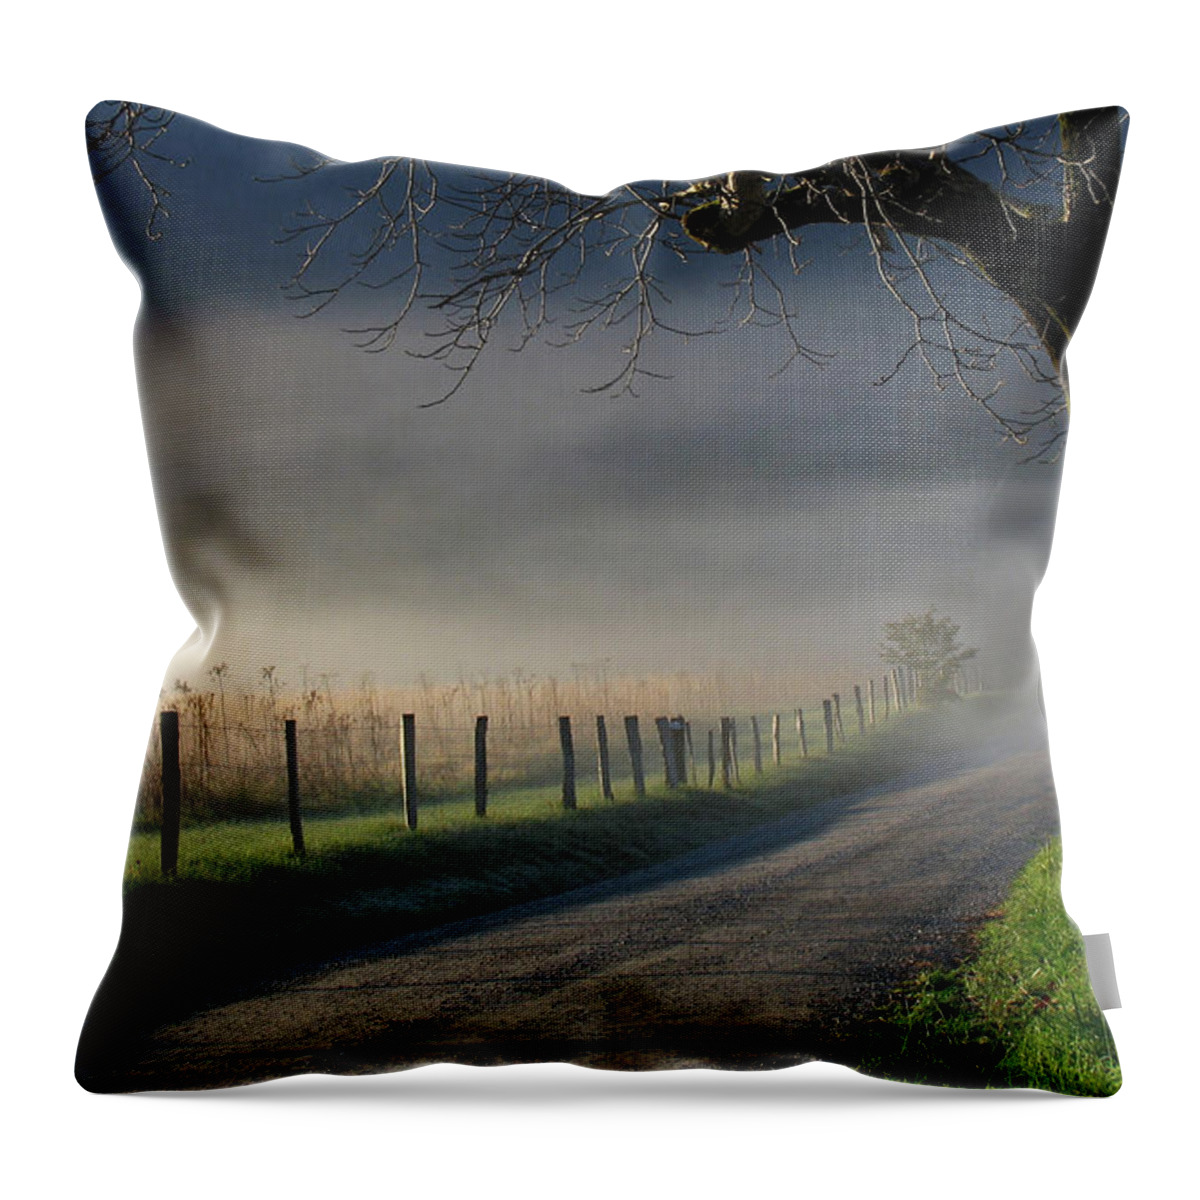 Cades Cove Throw Pillow featuring the photograph Sparks Lane Sunrise III by Douglas Stucky